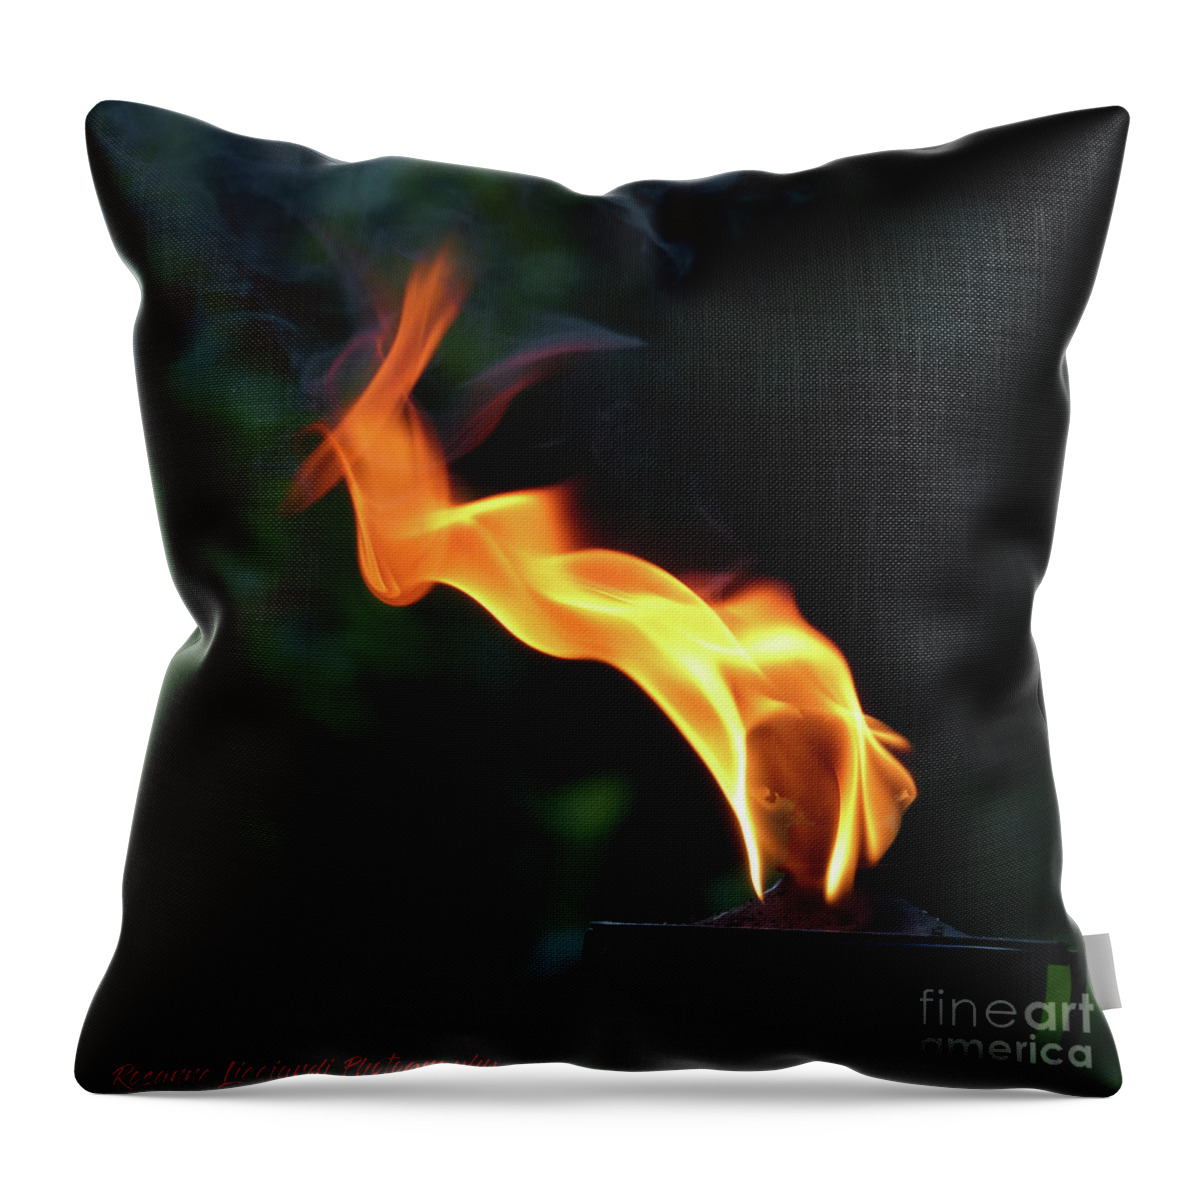 Exotic Throw Pillow featuring the photograph Torch Series V by Rosanne Licciardi